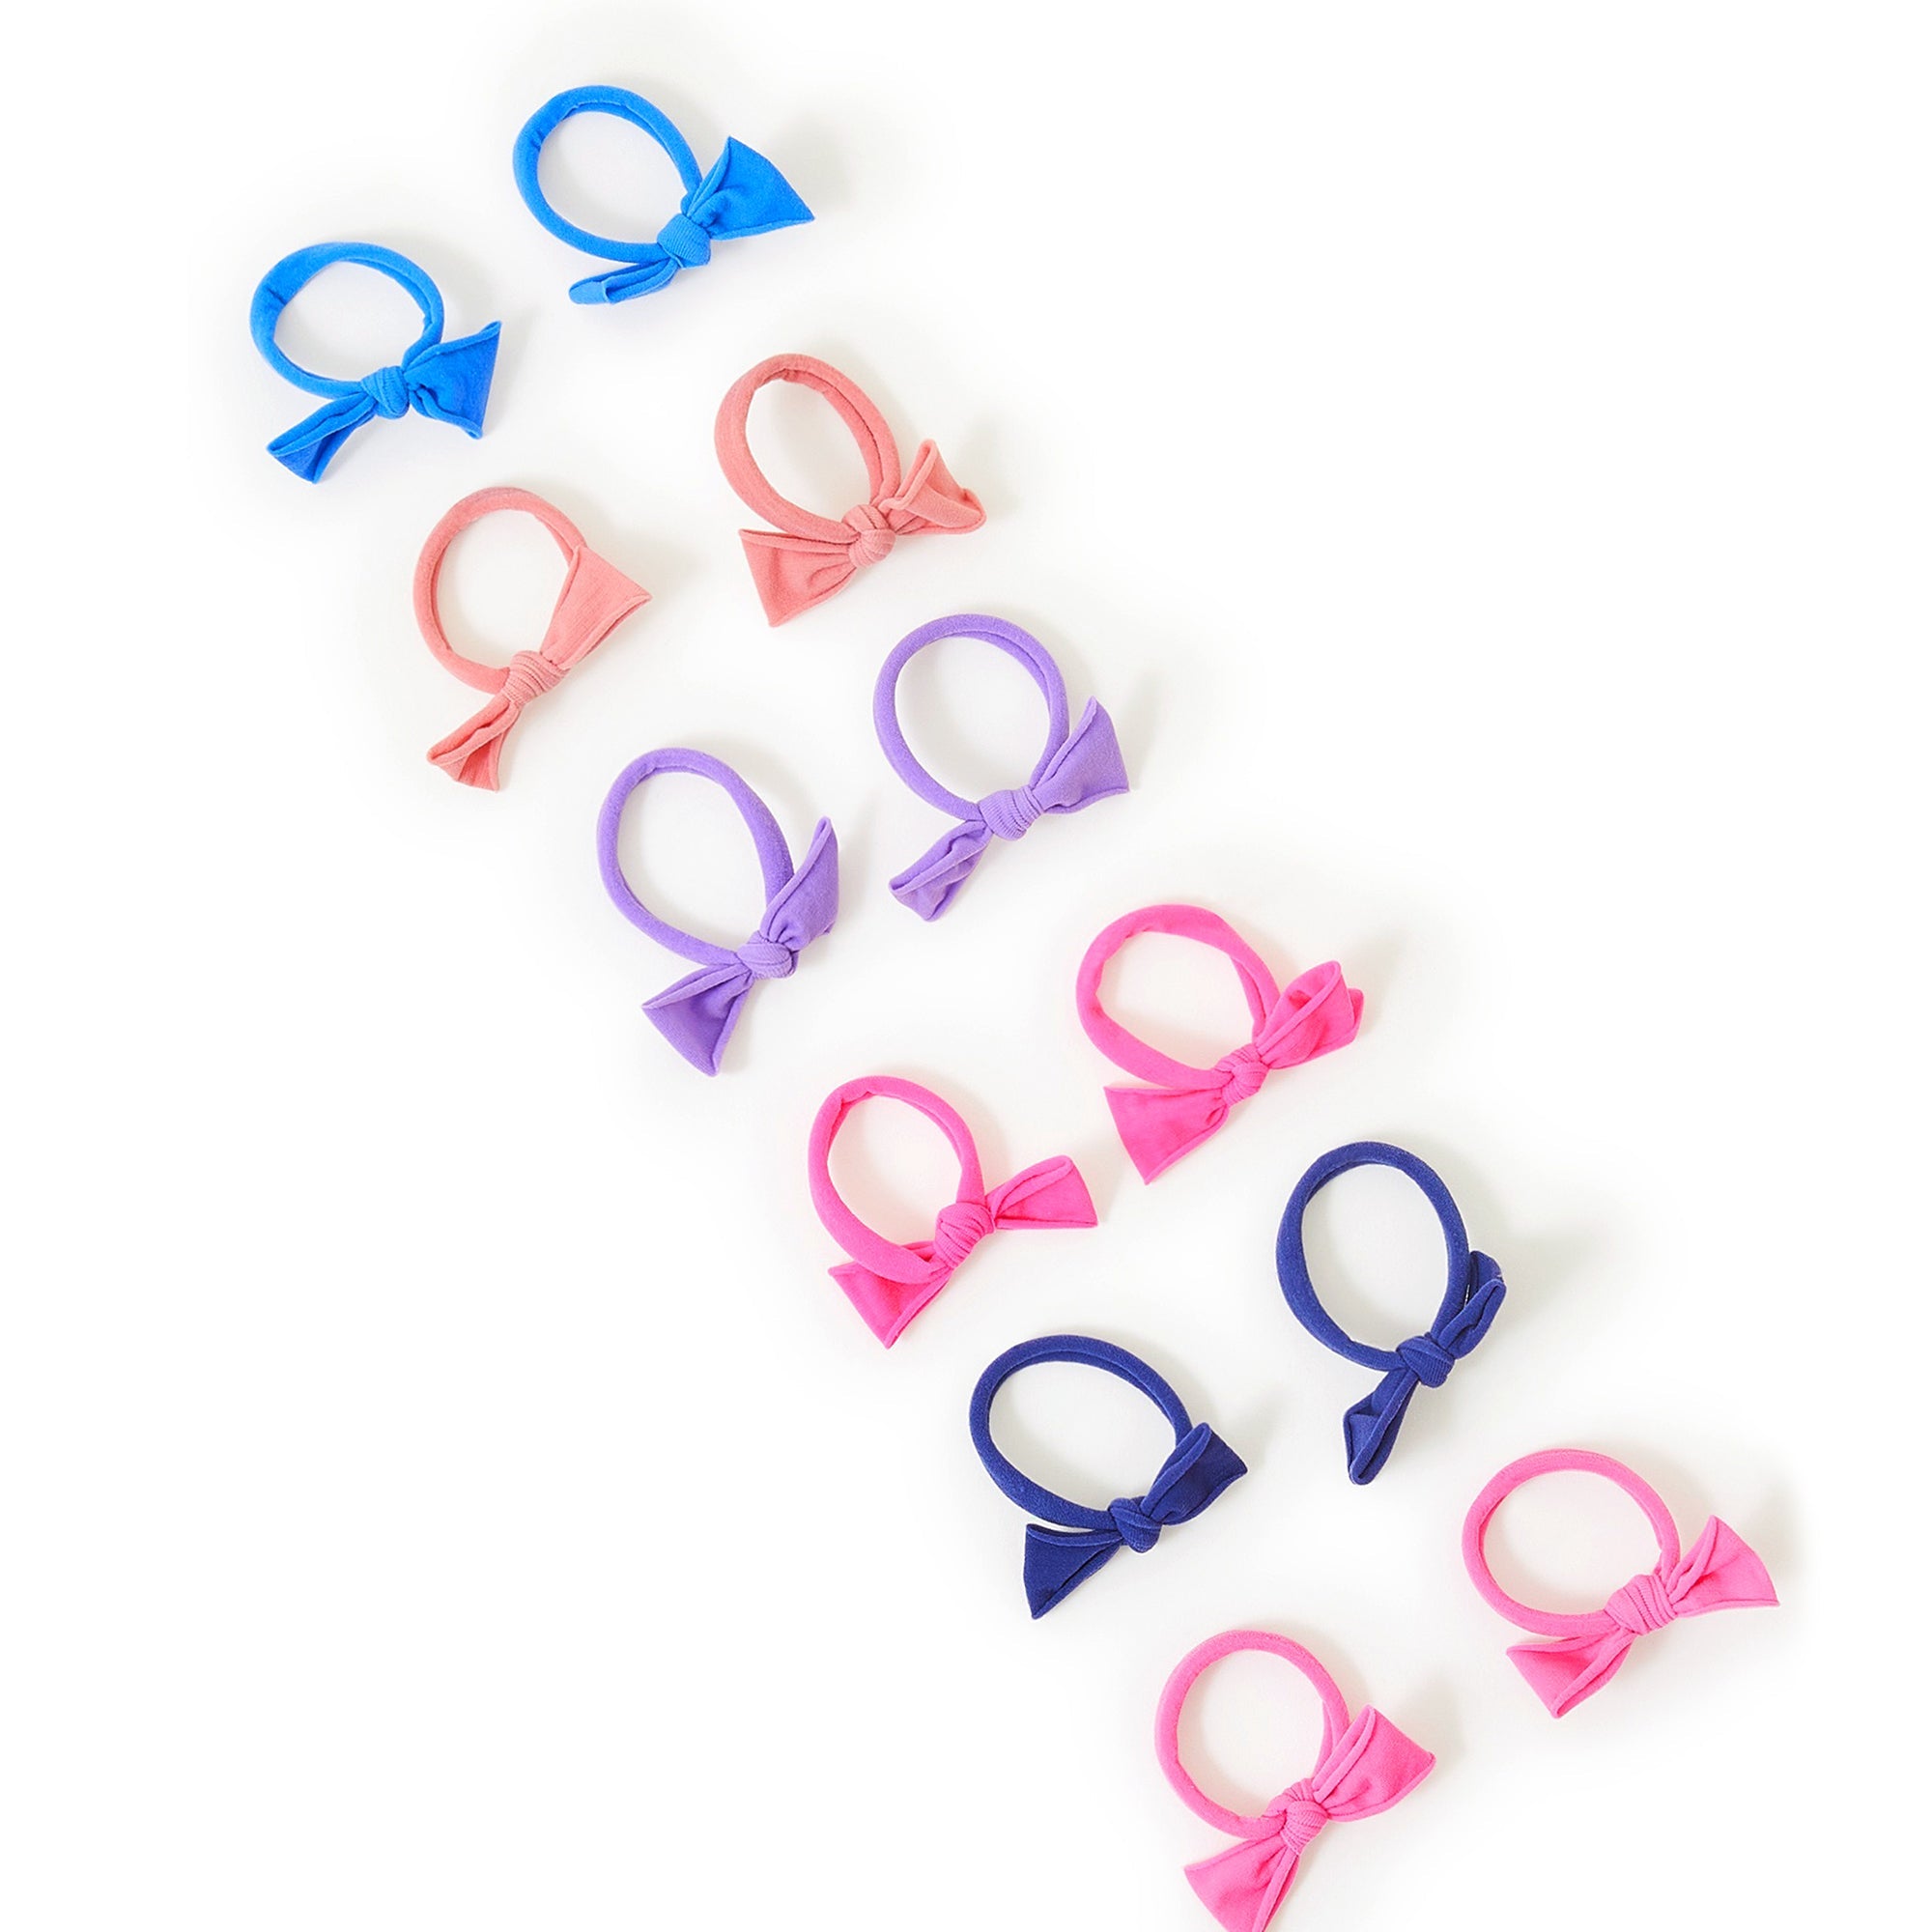 Accessorize London Girl's Mini Tie Hair Pony Pack OF 6